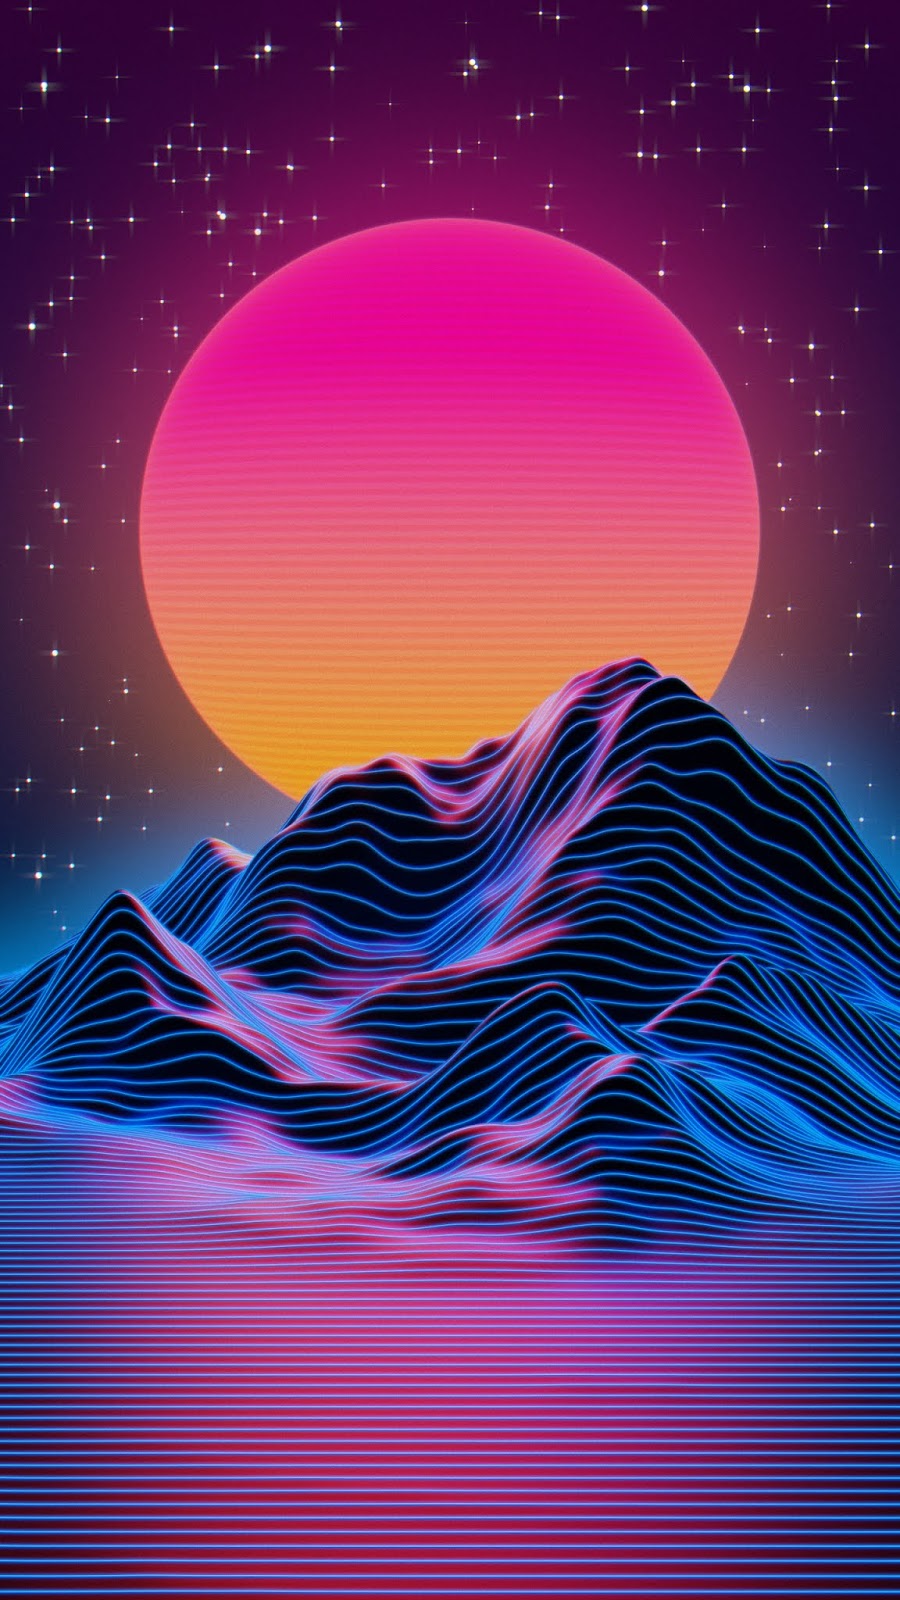  AESTHETIC  VAPORWAVE PHONE  WALLPAPER  COLLECTION 192 